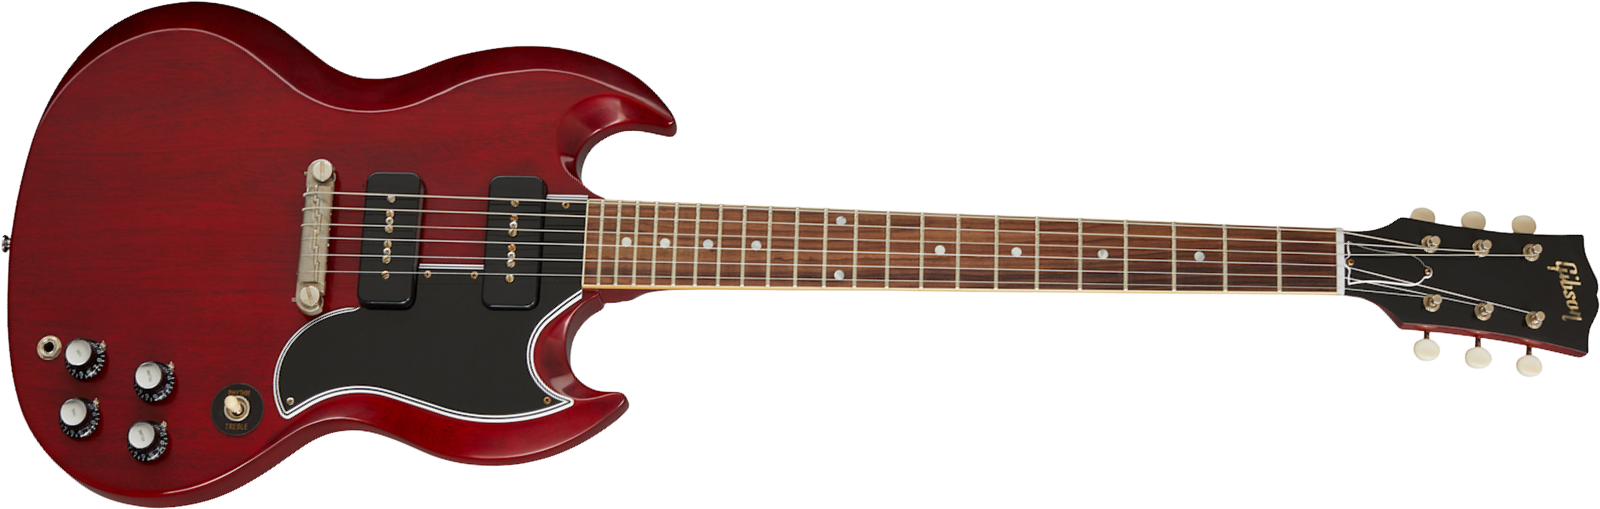 Gibson Custom Shop Sg Special 1963 Reissue 2p90 Ht Rw - Vos Cherry Red - Double Cut E-Gitarre - Main picture